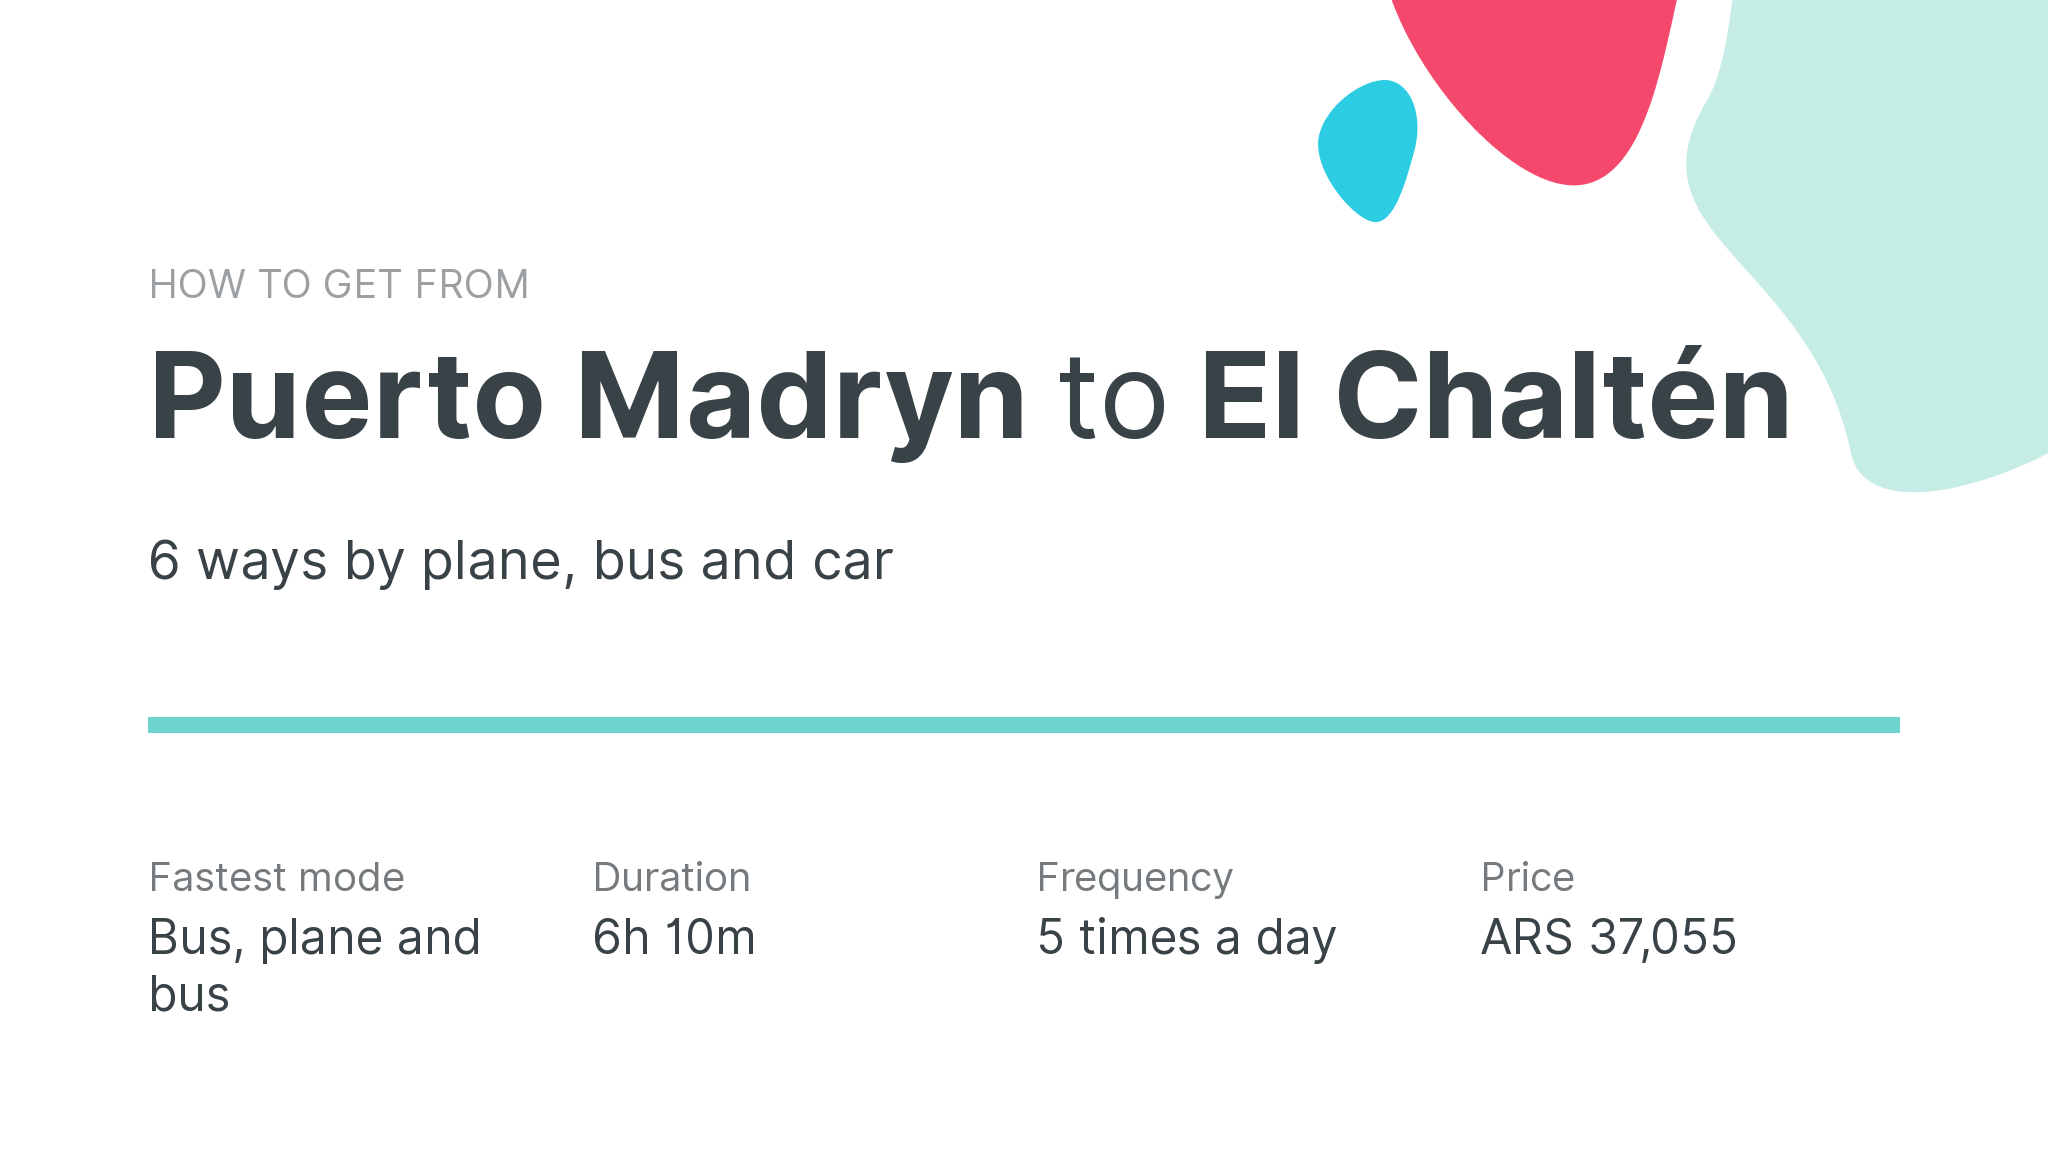 How do I get from Puerto Madryn to El Chaltén